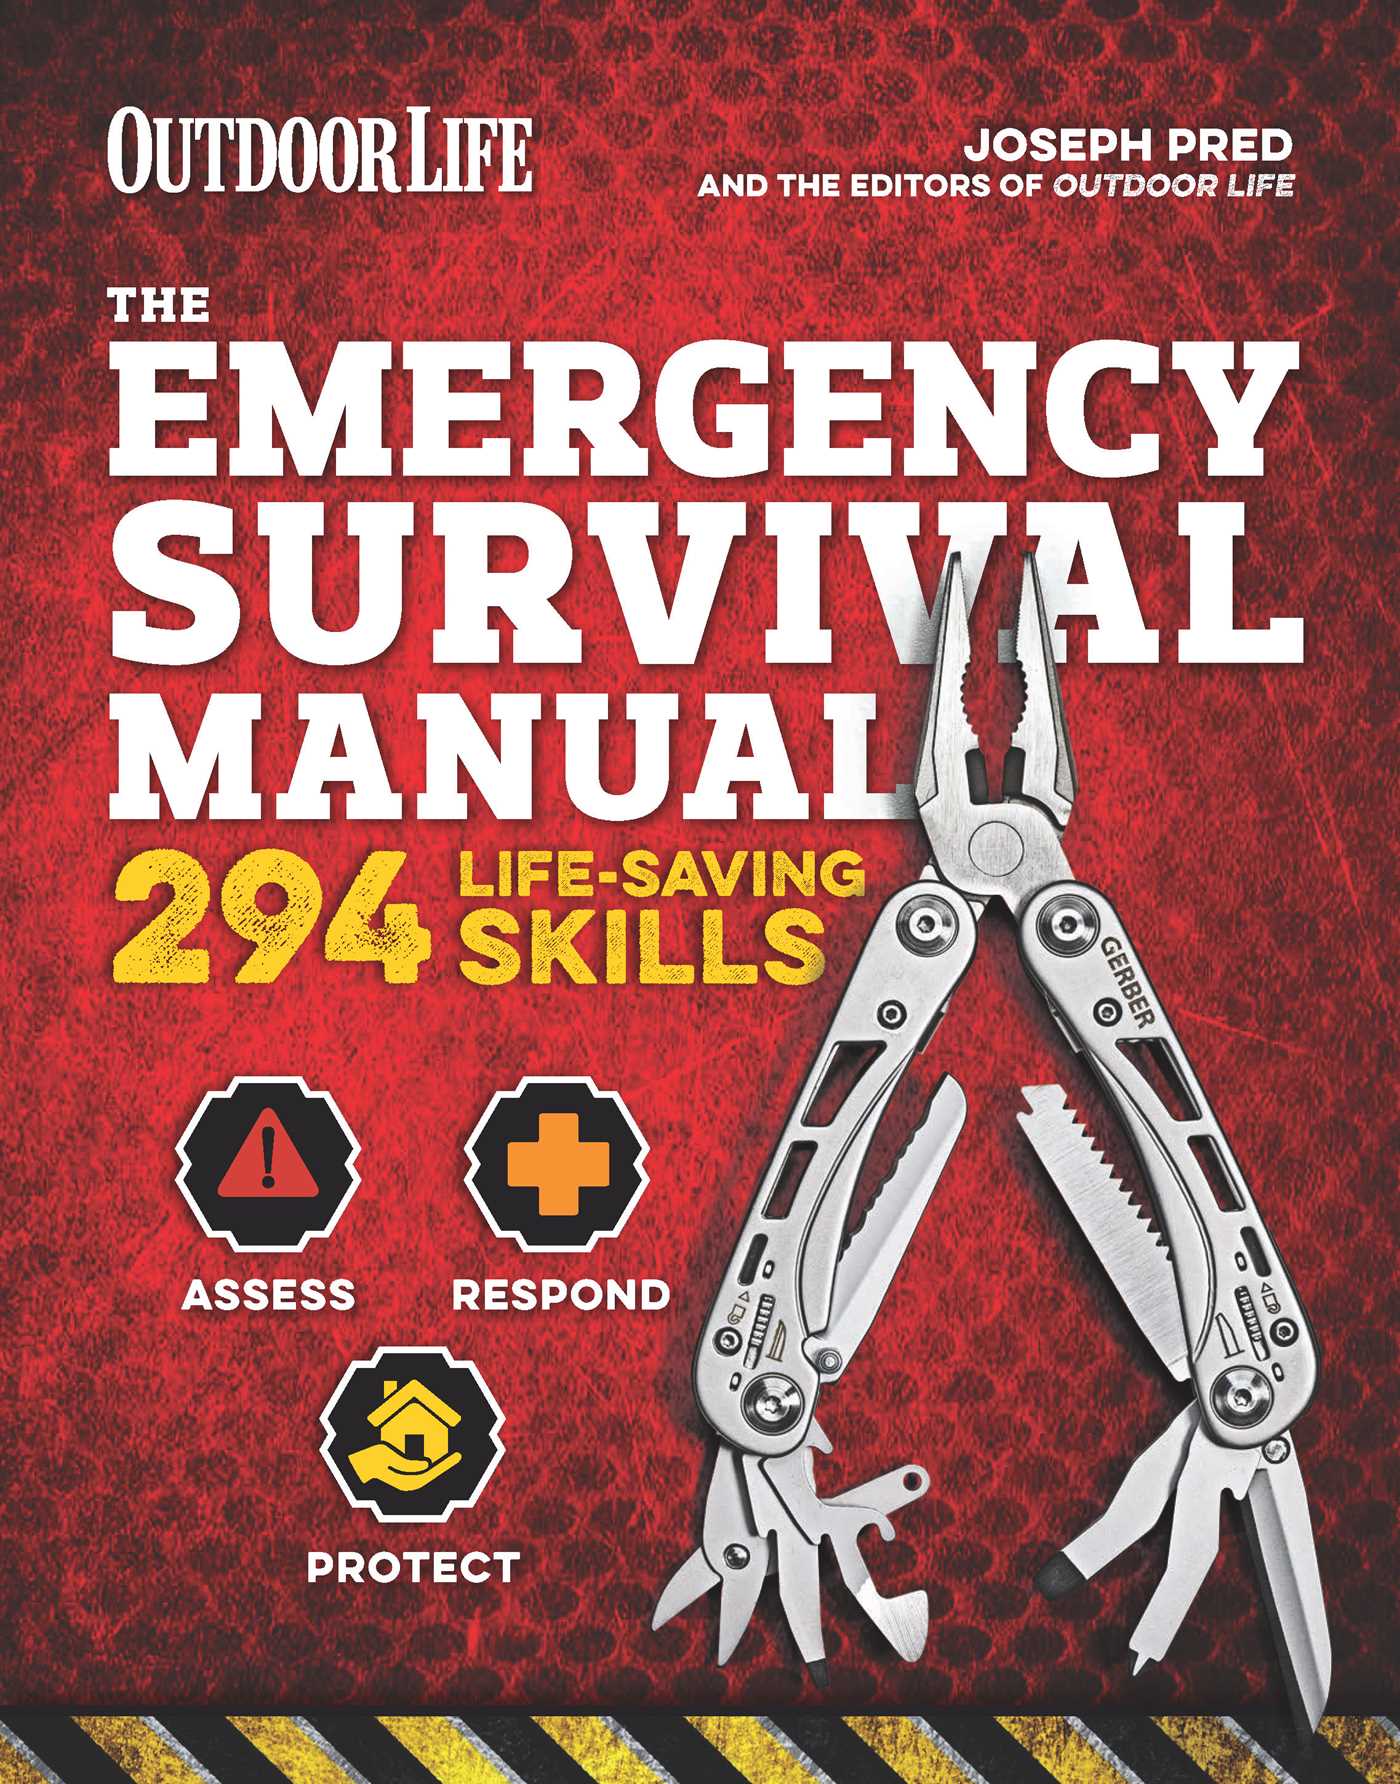 the emergency survival manual by joseph pred